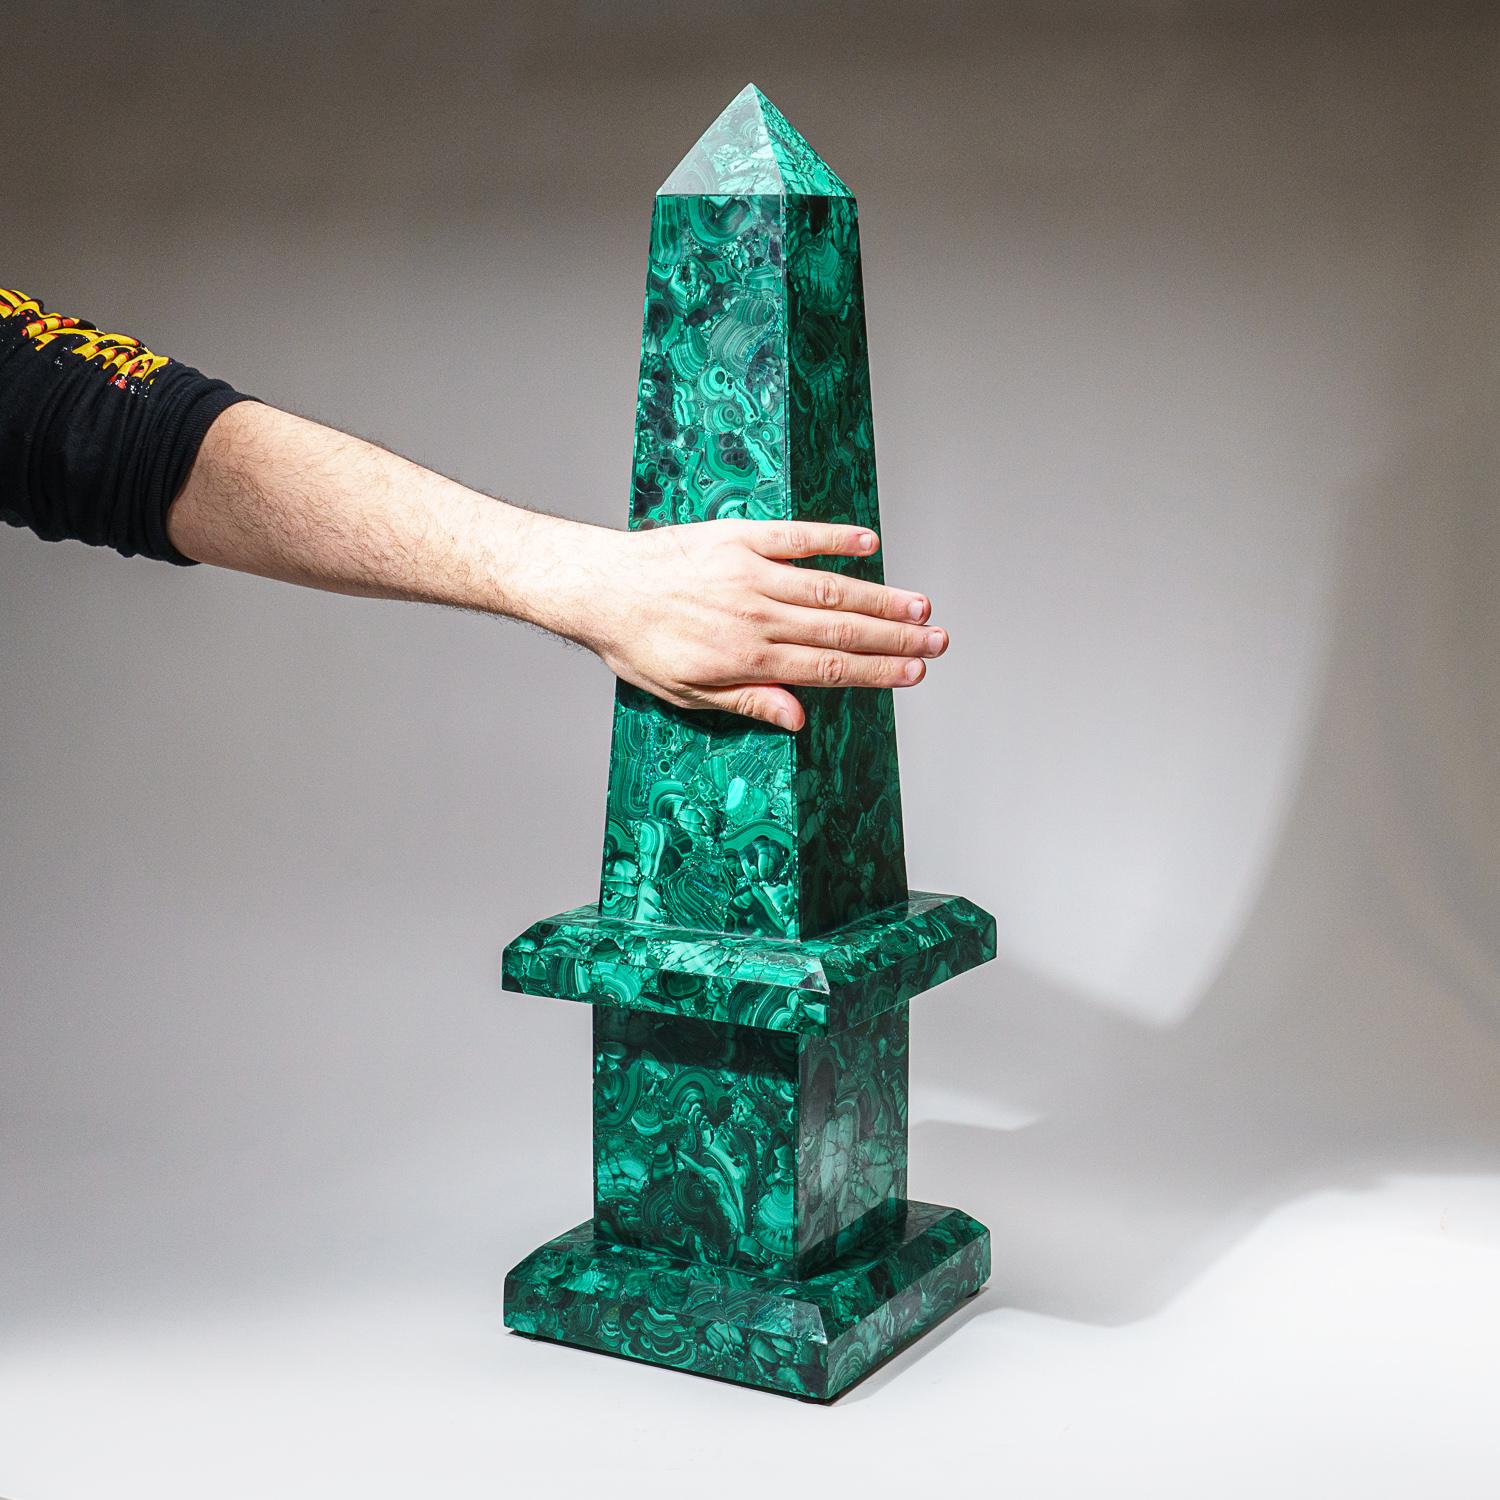 Handcrafted to perfection, this obelisk was made from AAA quality natural Malachite. Malachite is the essence of joy and is known as the 